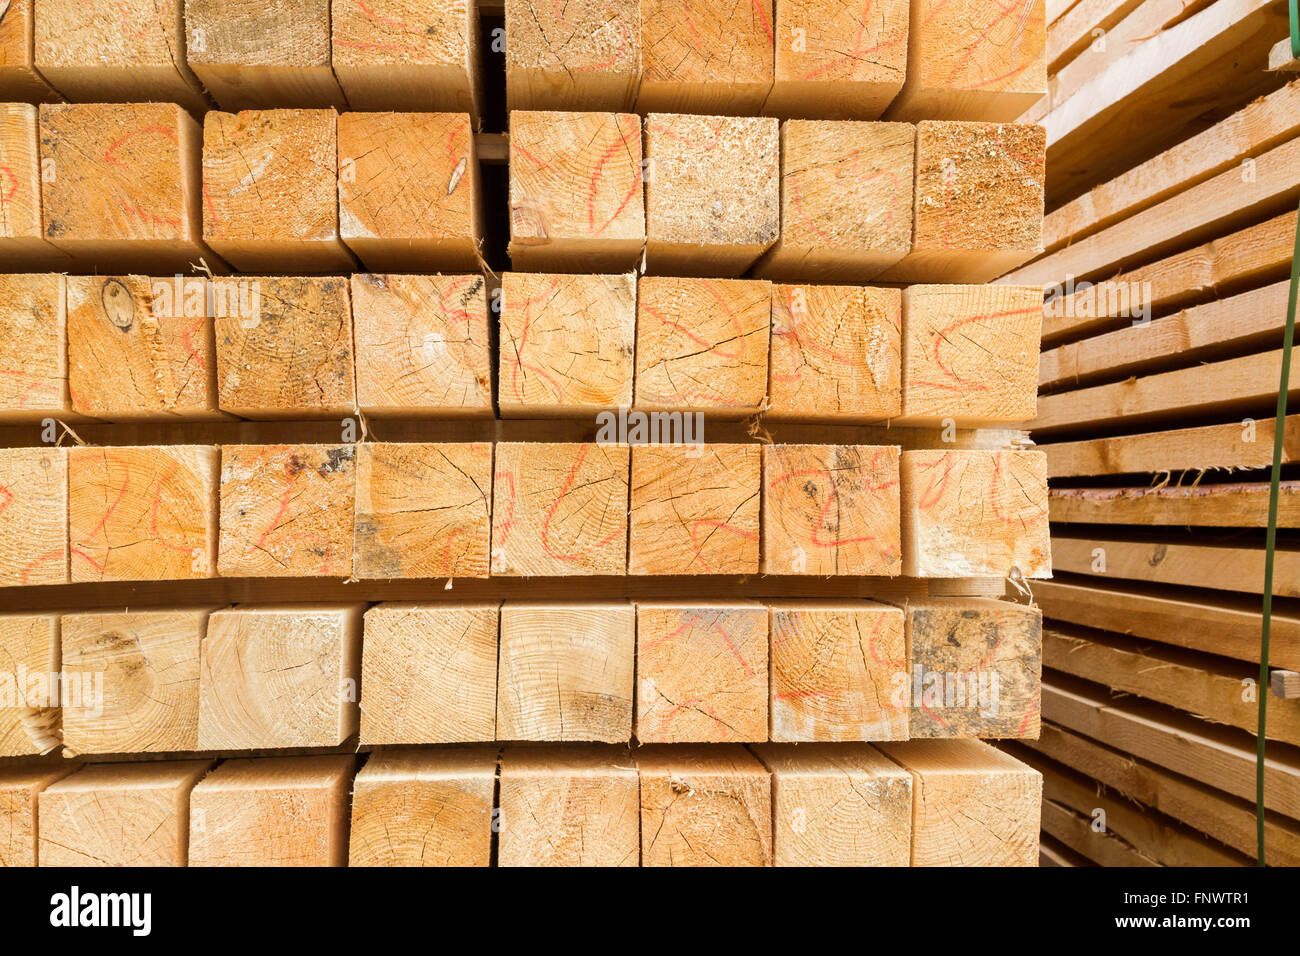 Wooden beams on the basis of an open construction Stock Photo